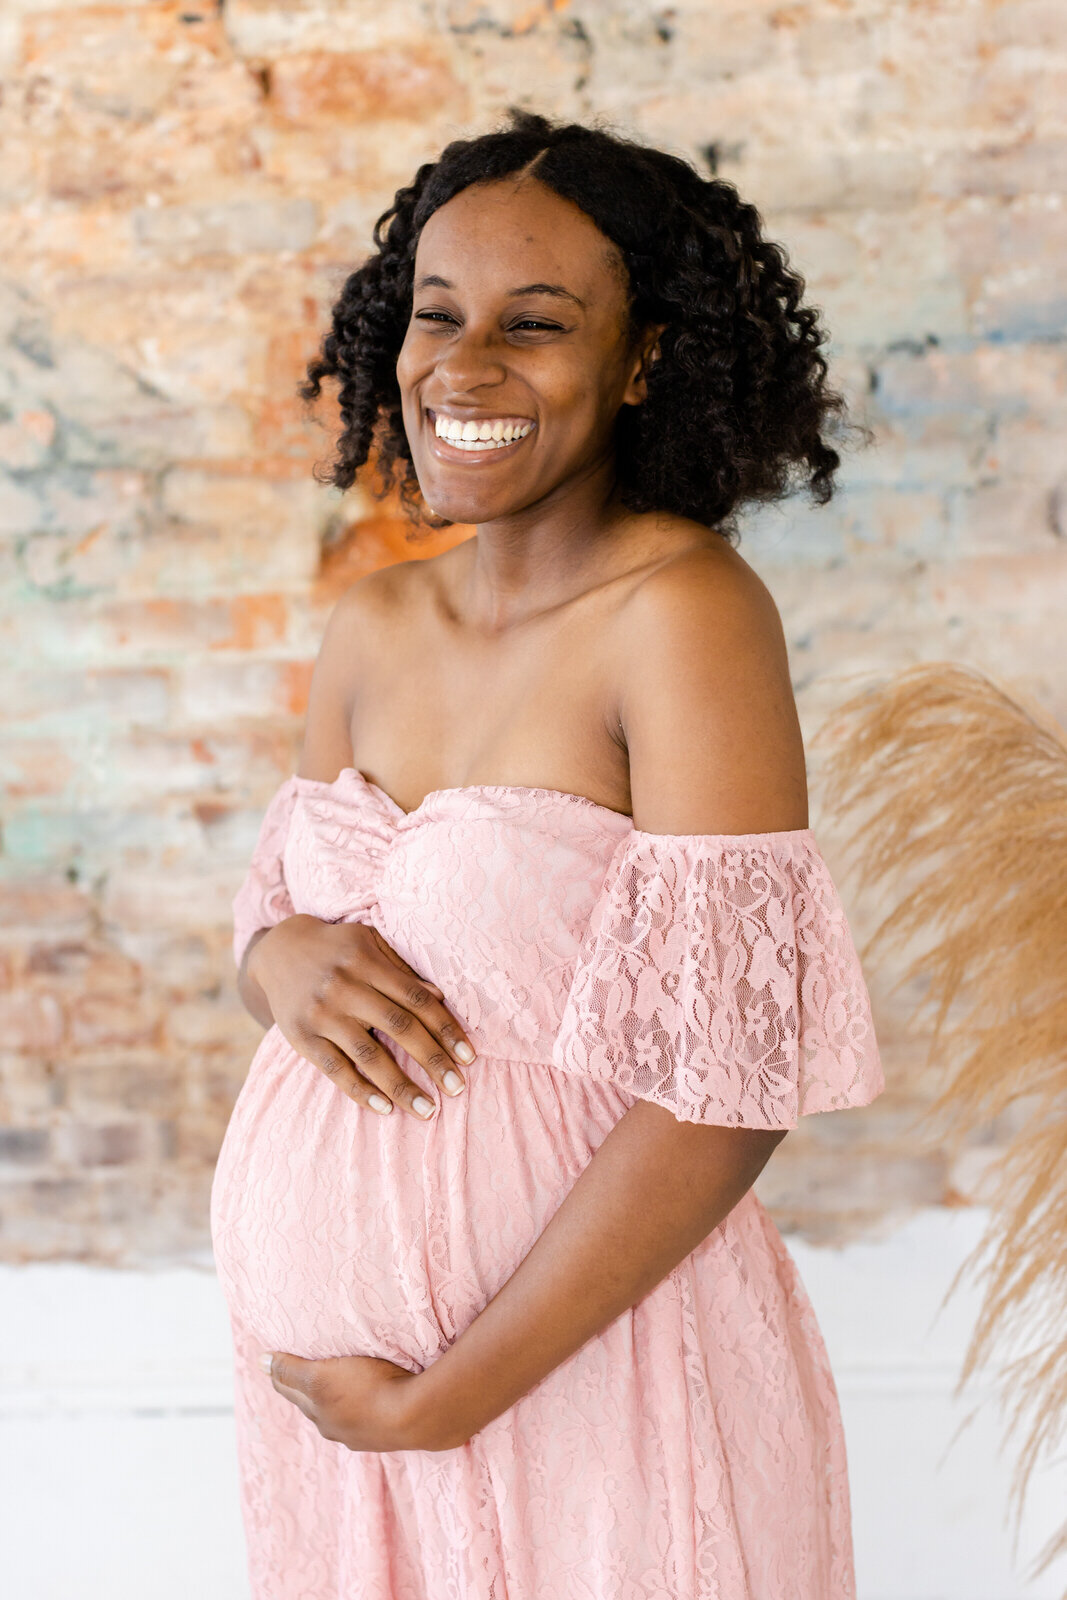 Mom smiles and holds onto baby bump in front of brick wall at Relic15 Studio in Buford